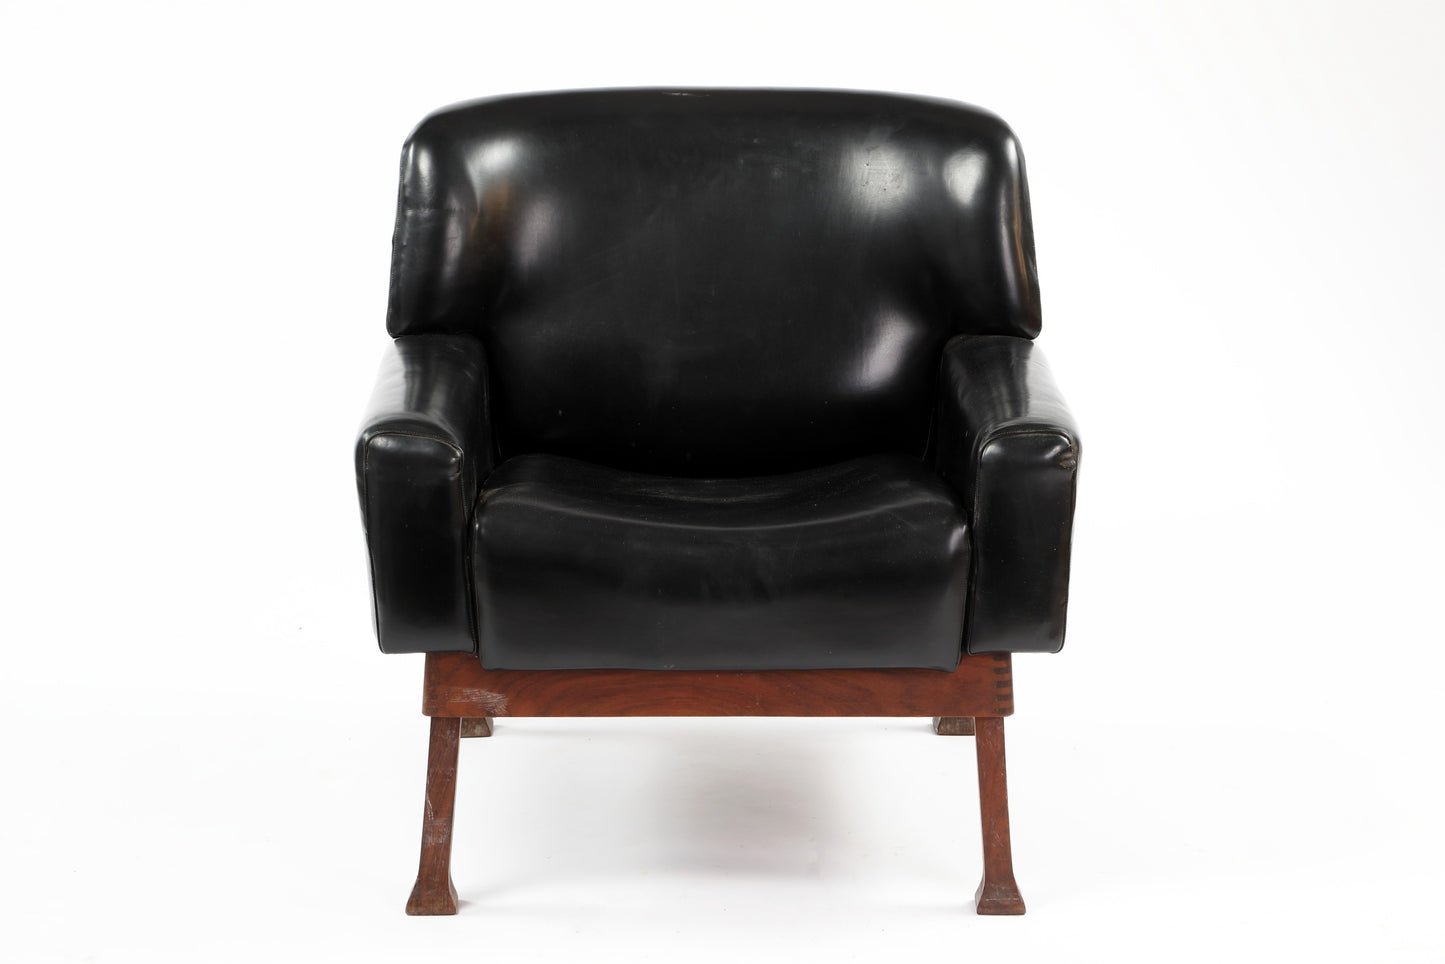 Allegra armchair by Piero Ranzani for Elam from the 60s